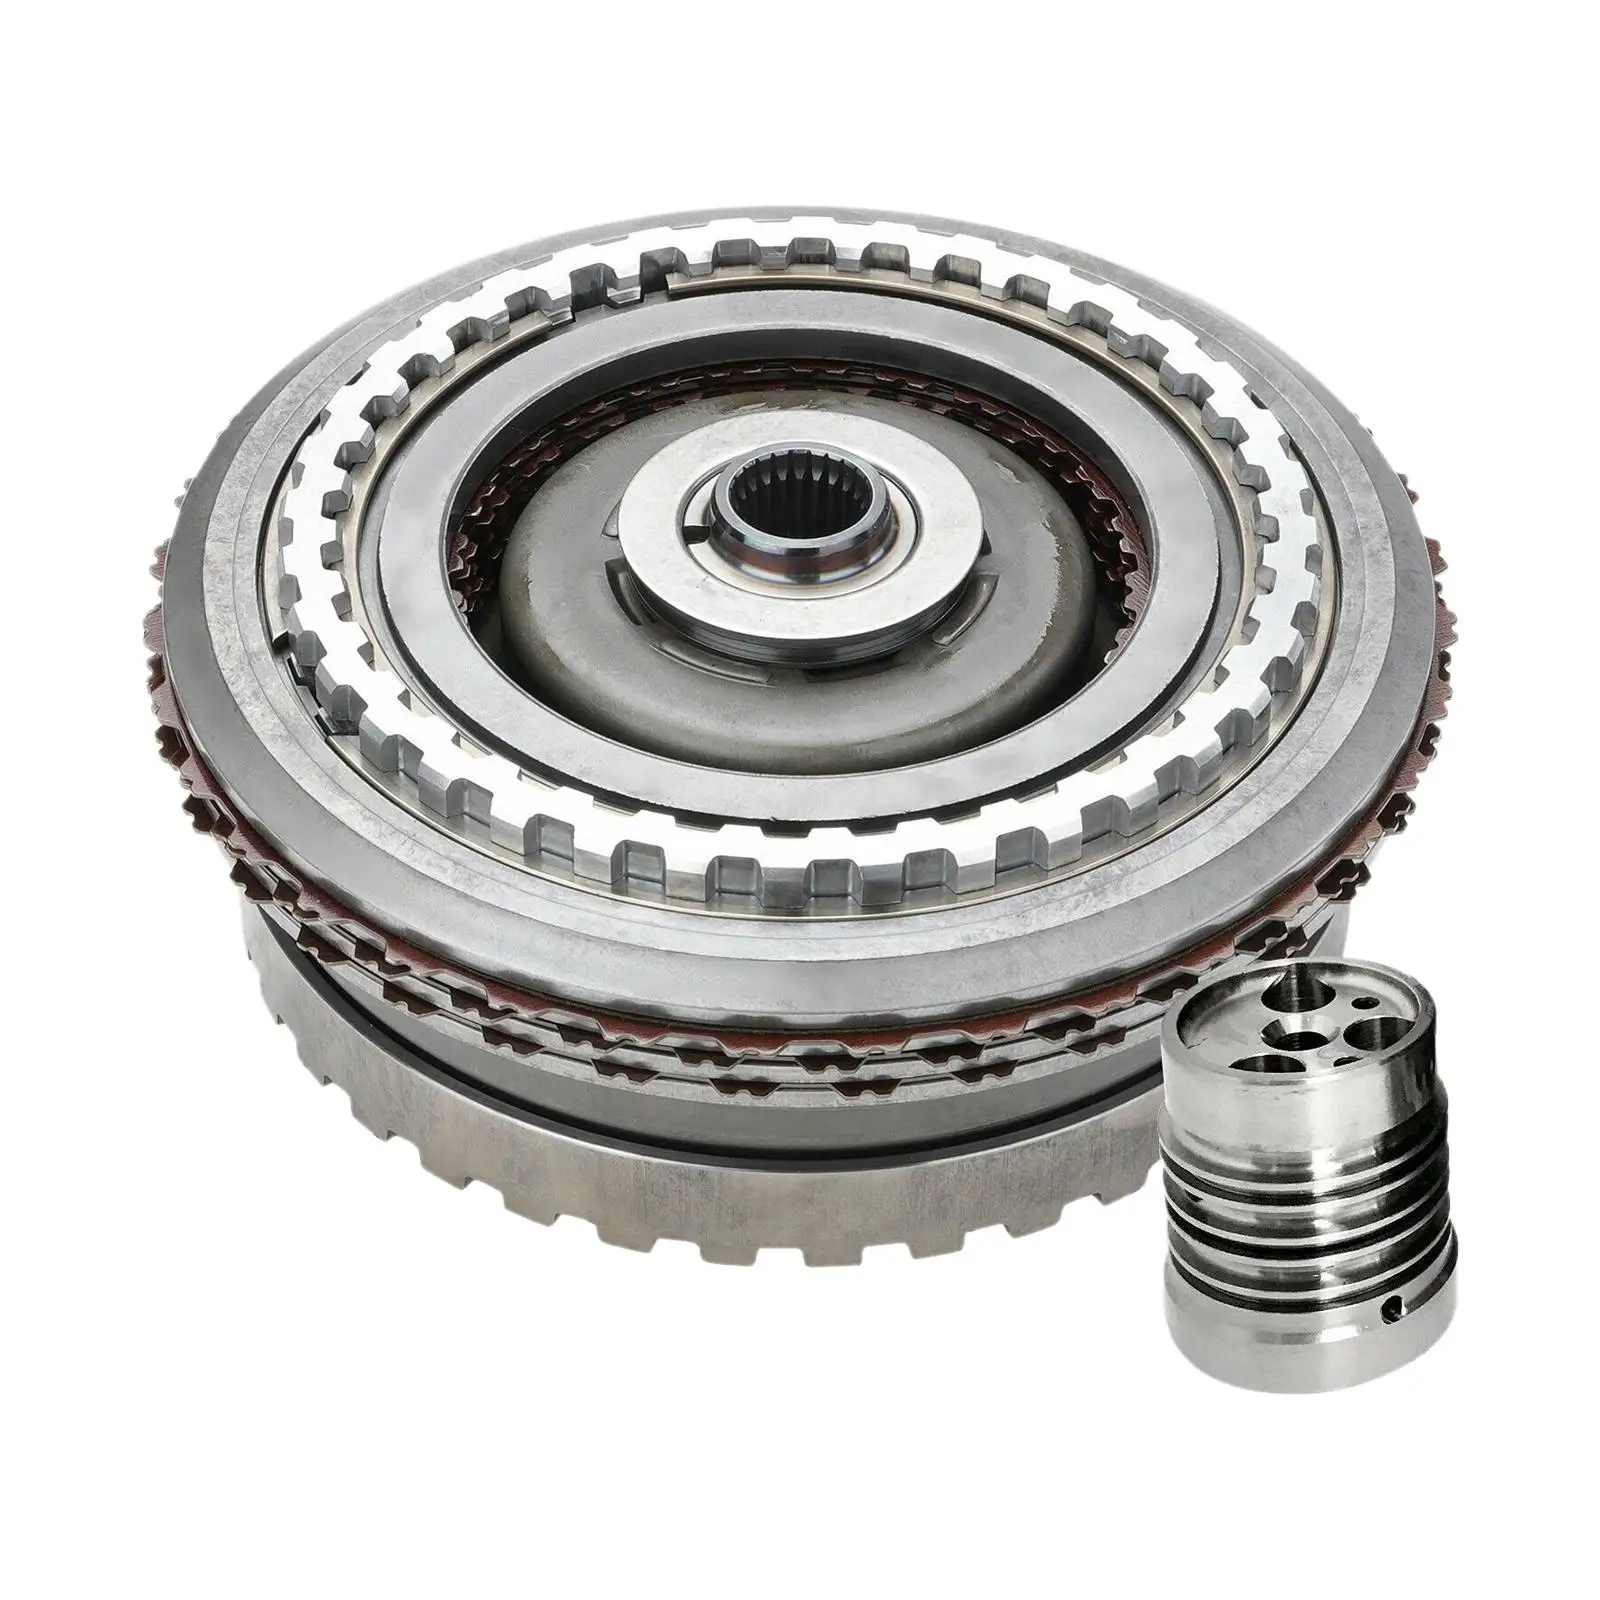 Transmission Clutch Assembly Input Drum for Chevrolet Replace Parts